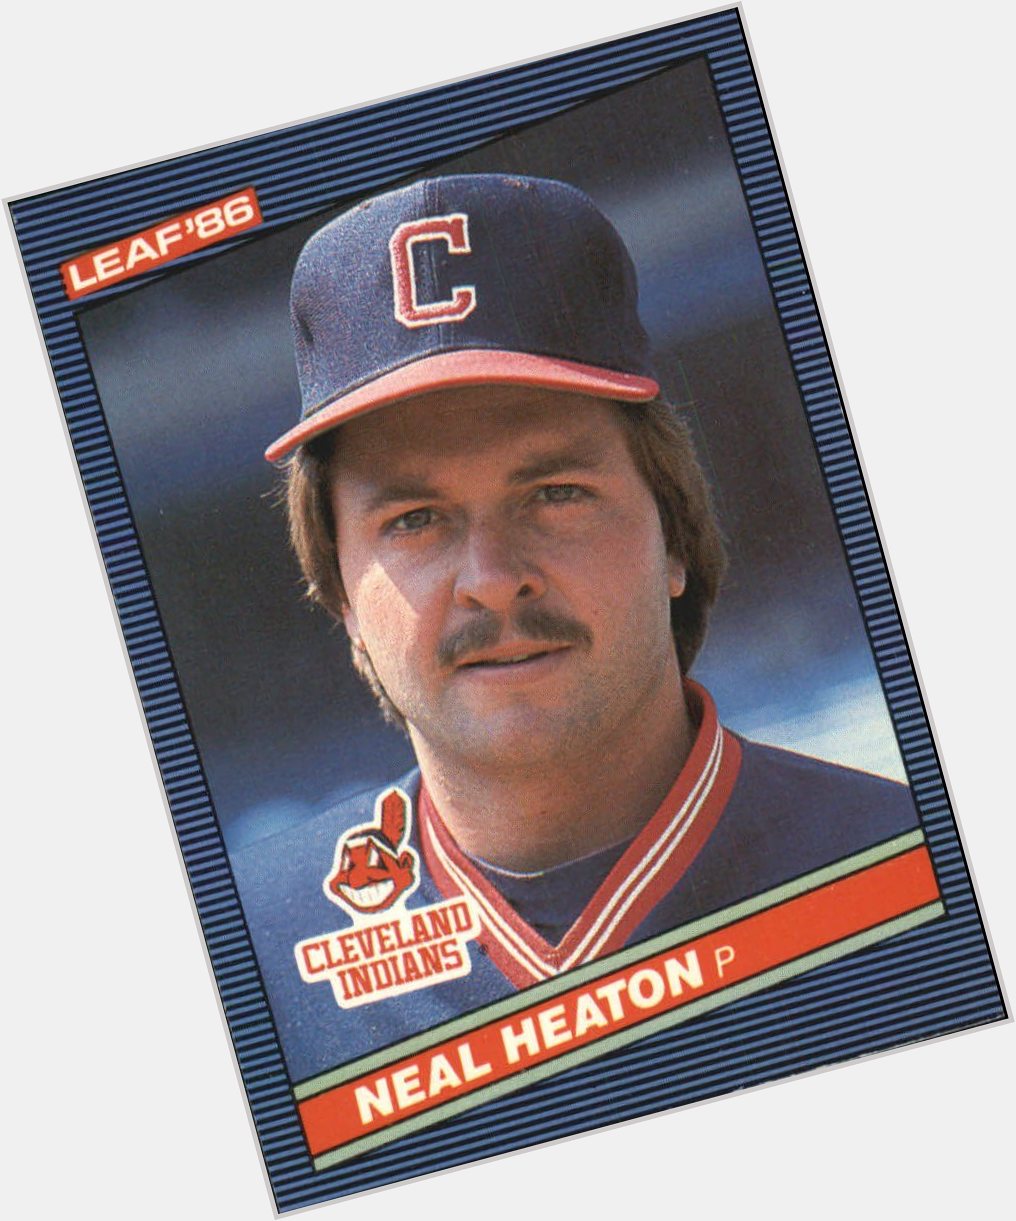 Happy 62nd birthday Neal Heaton, who went 11-7 for the Indians in 1983. 